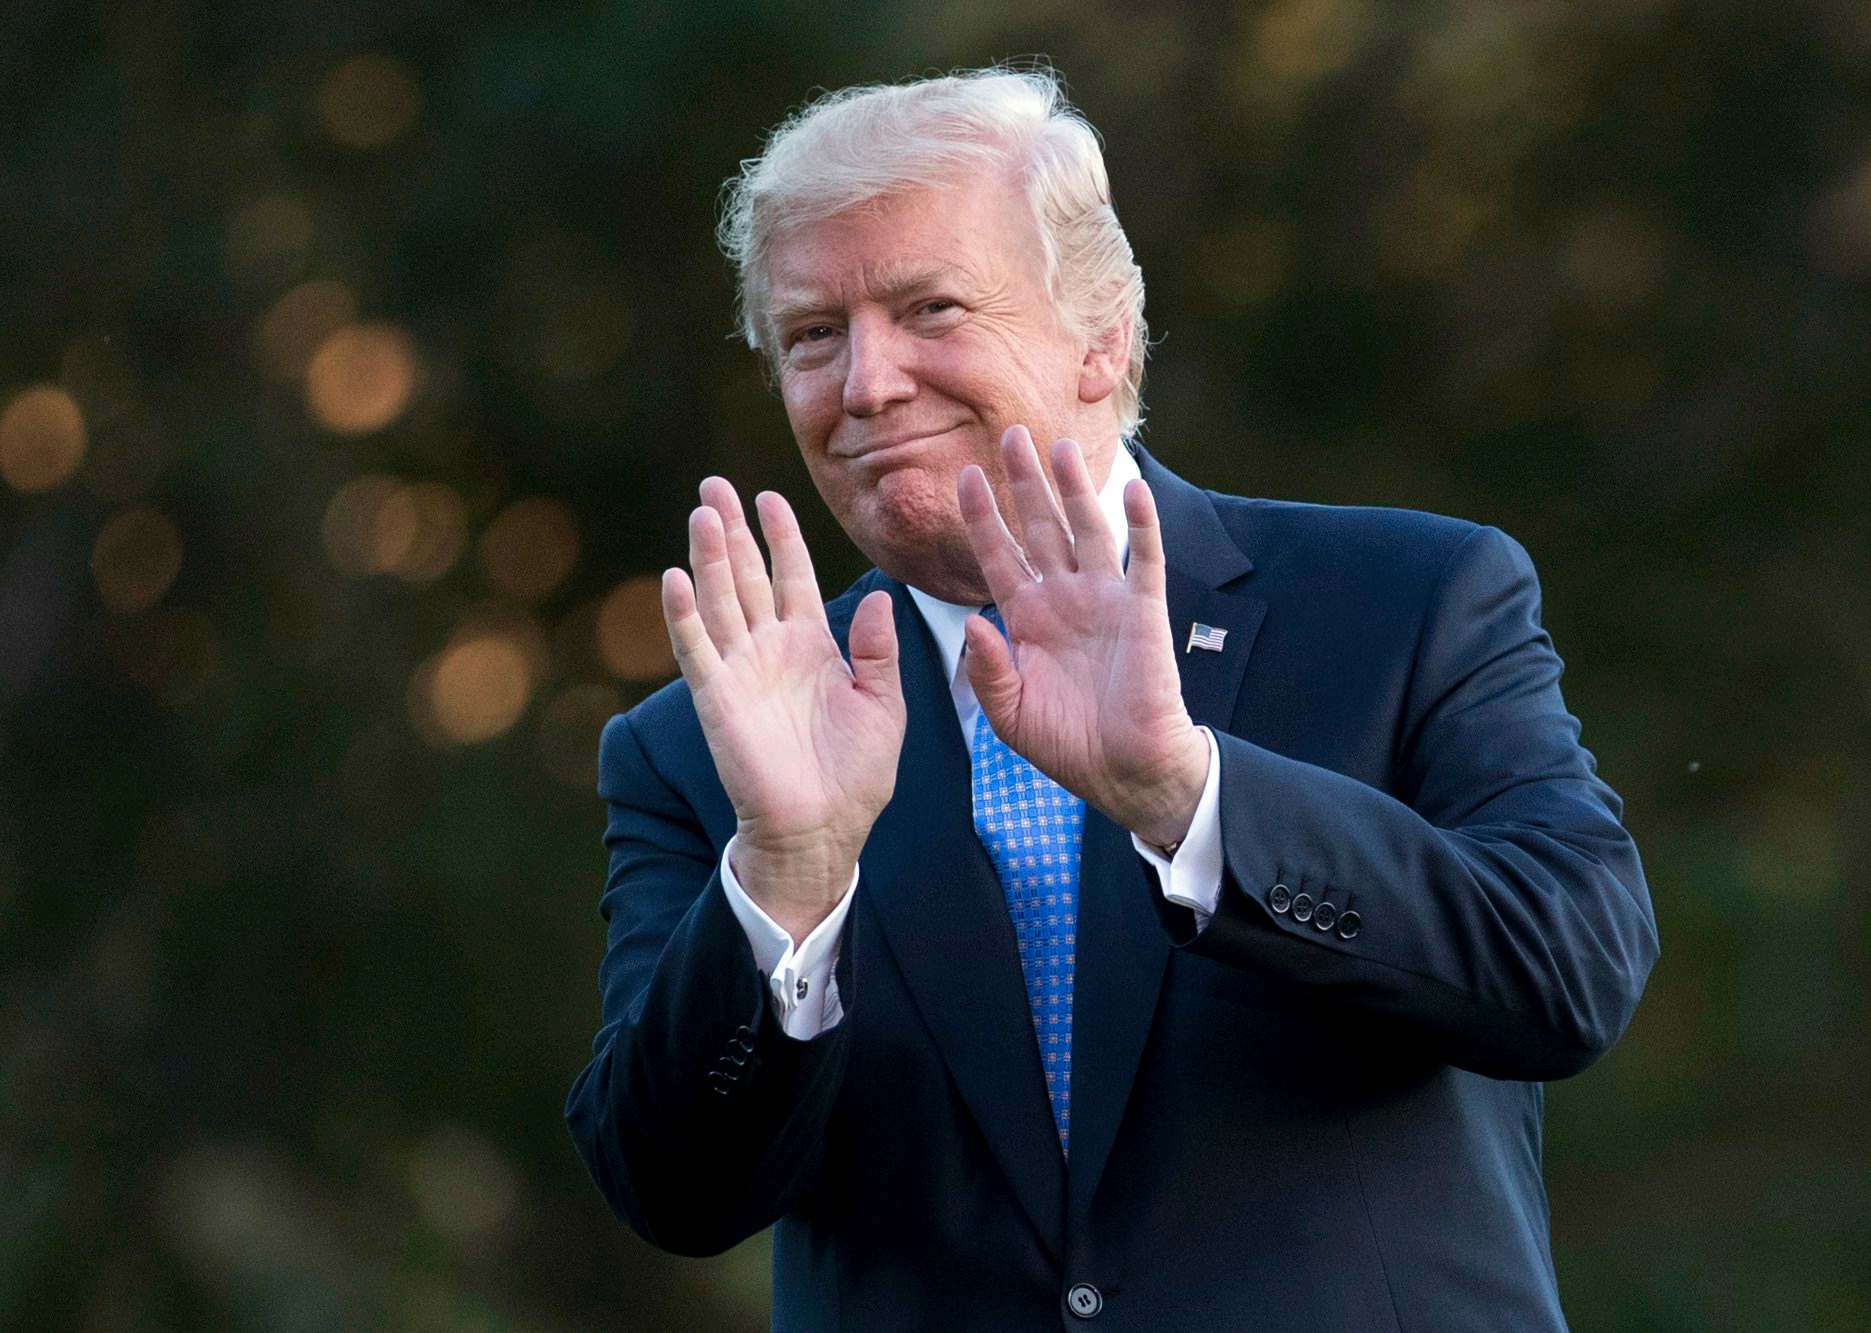 President Donald Trump gestures as he walks from Marine One across the South Lawn of the White House in Washington, Wednesday, Sept. 27, 2017, as he returns from Indianapolis. (AP Photo/Carolyn Kaster) Trump